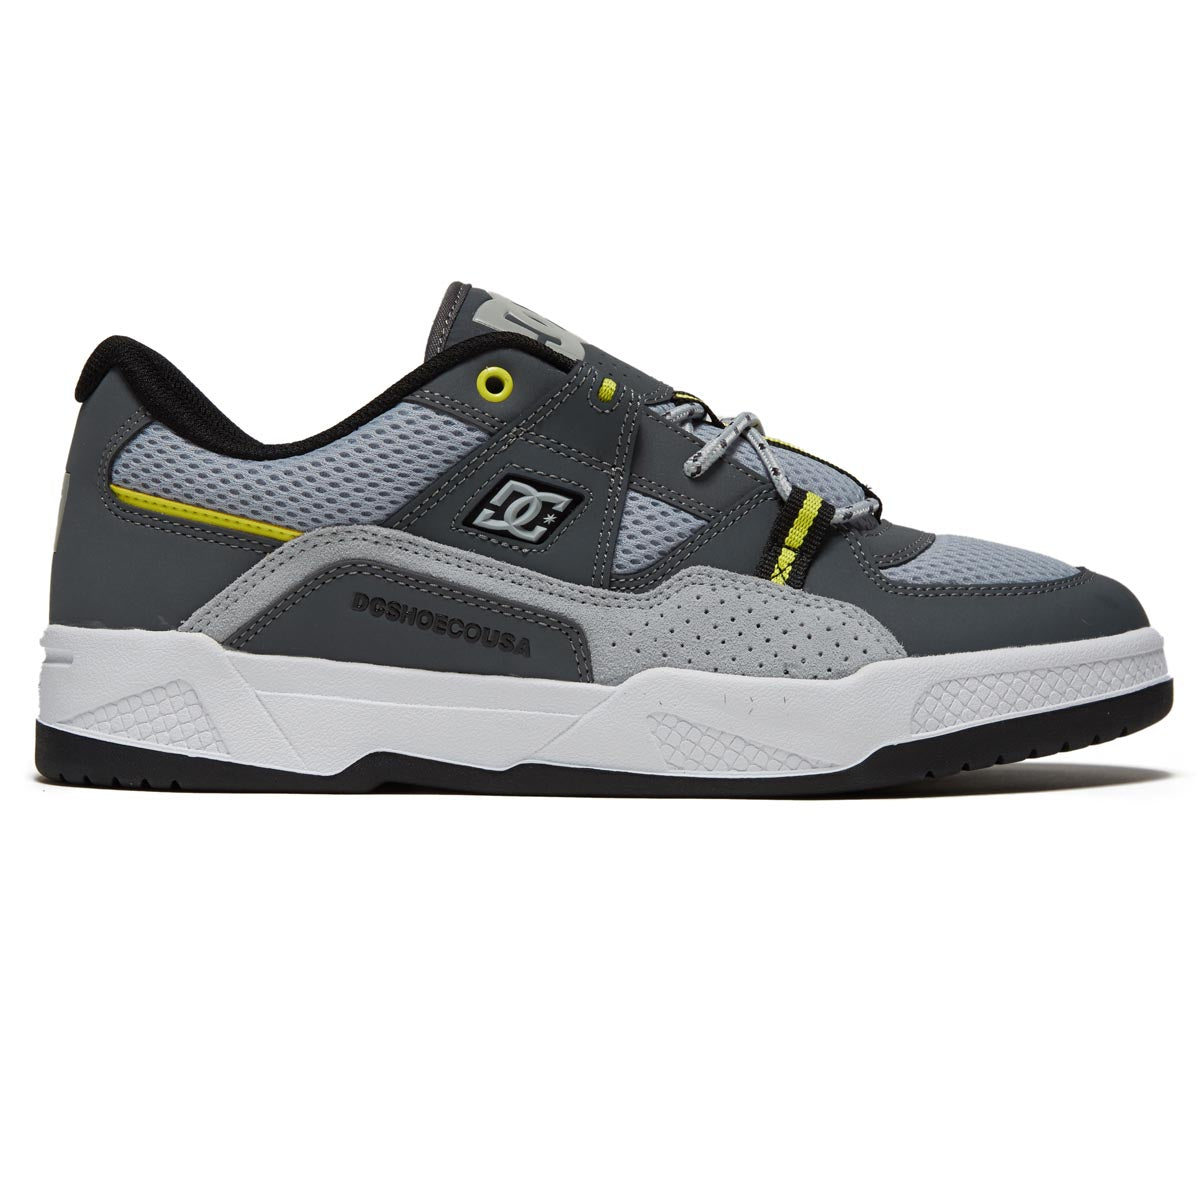 DC Construct Shoes - White/Grey/Yellow image 1